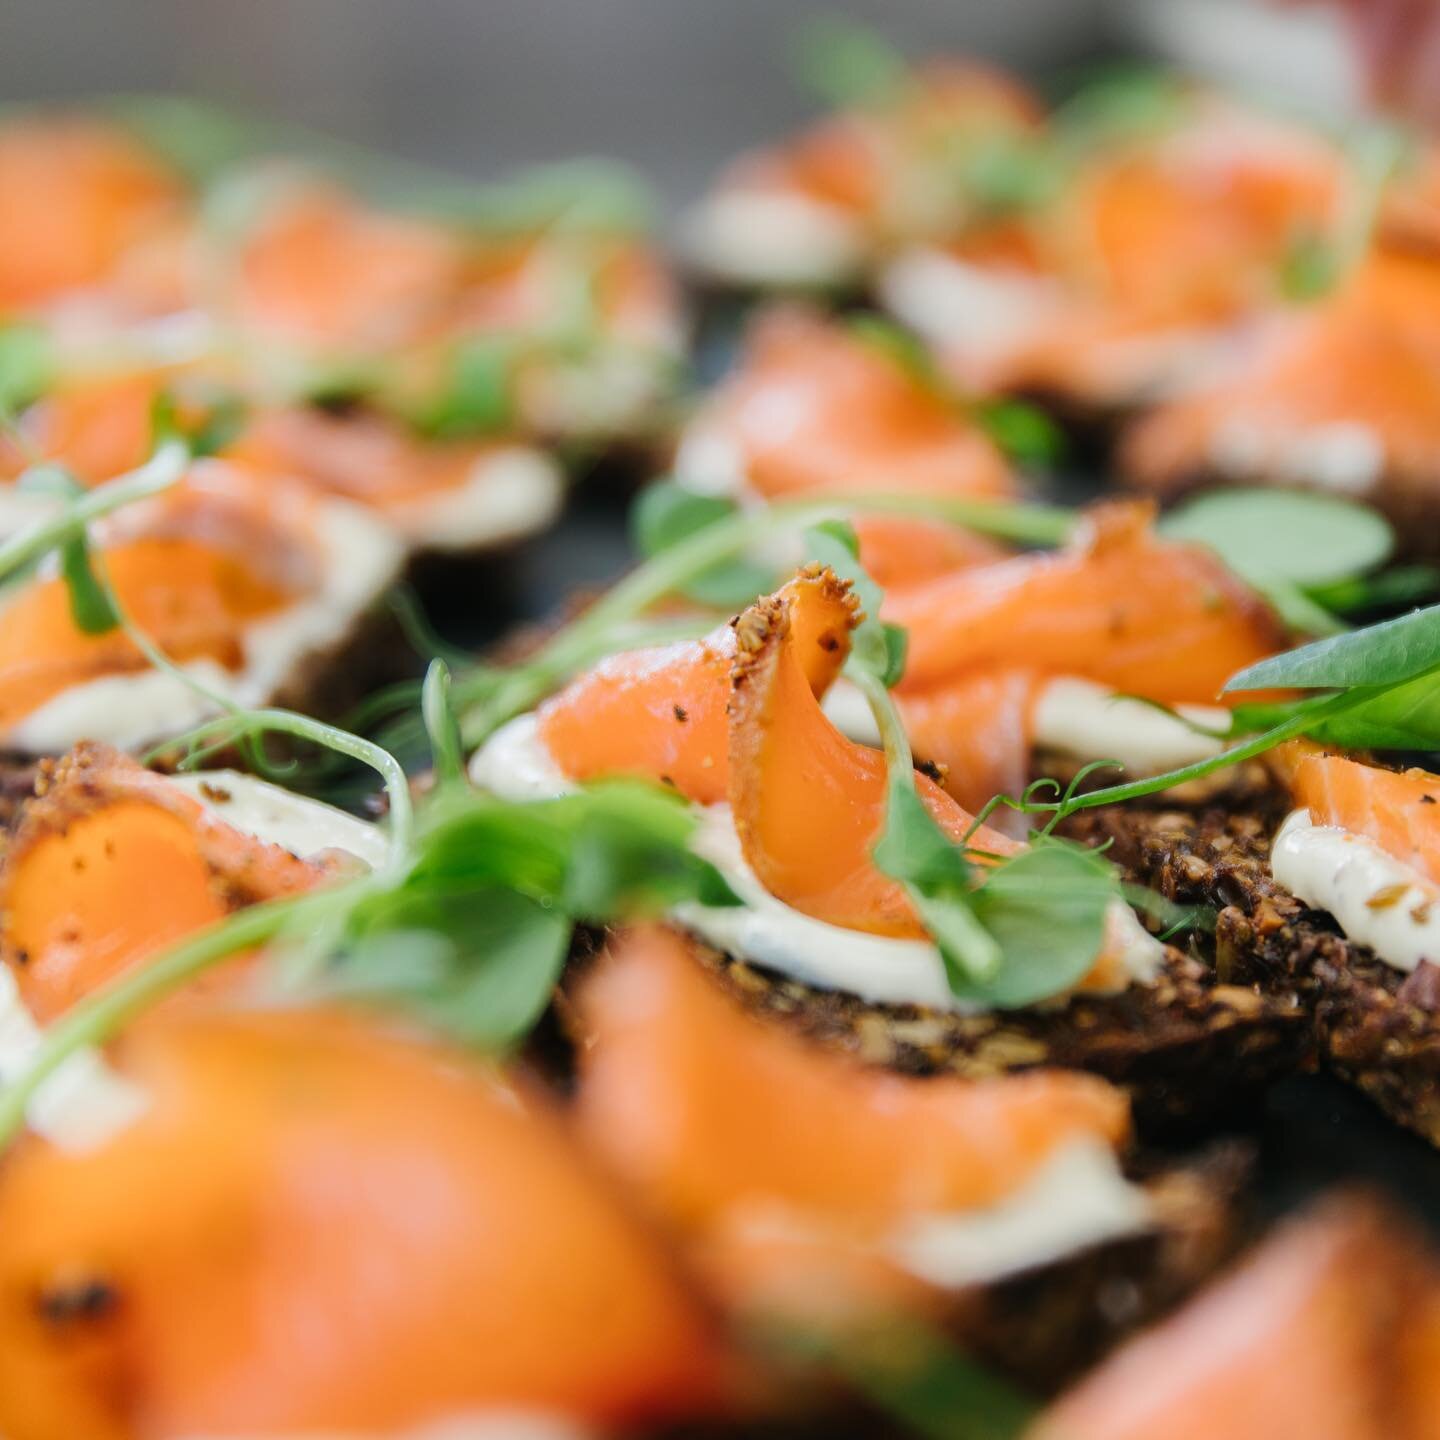 Check out our Salmon Pastrami on seeded toast with our sour cream and chives drizzled with basil oil&hellip; So close up you can almost taste it! 😮&zwj;💨🙌🏻 

Interested in us catering your event? Enquire today! 
Link in bio 🌱

🏷 
#food #foodie 